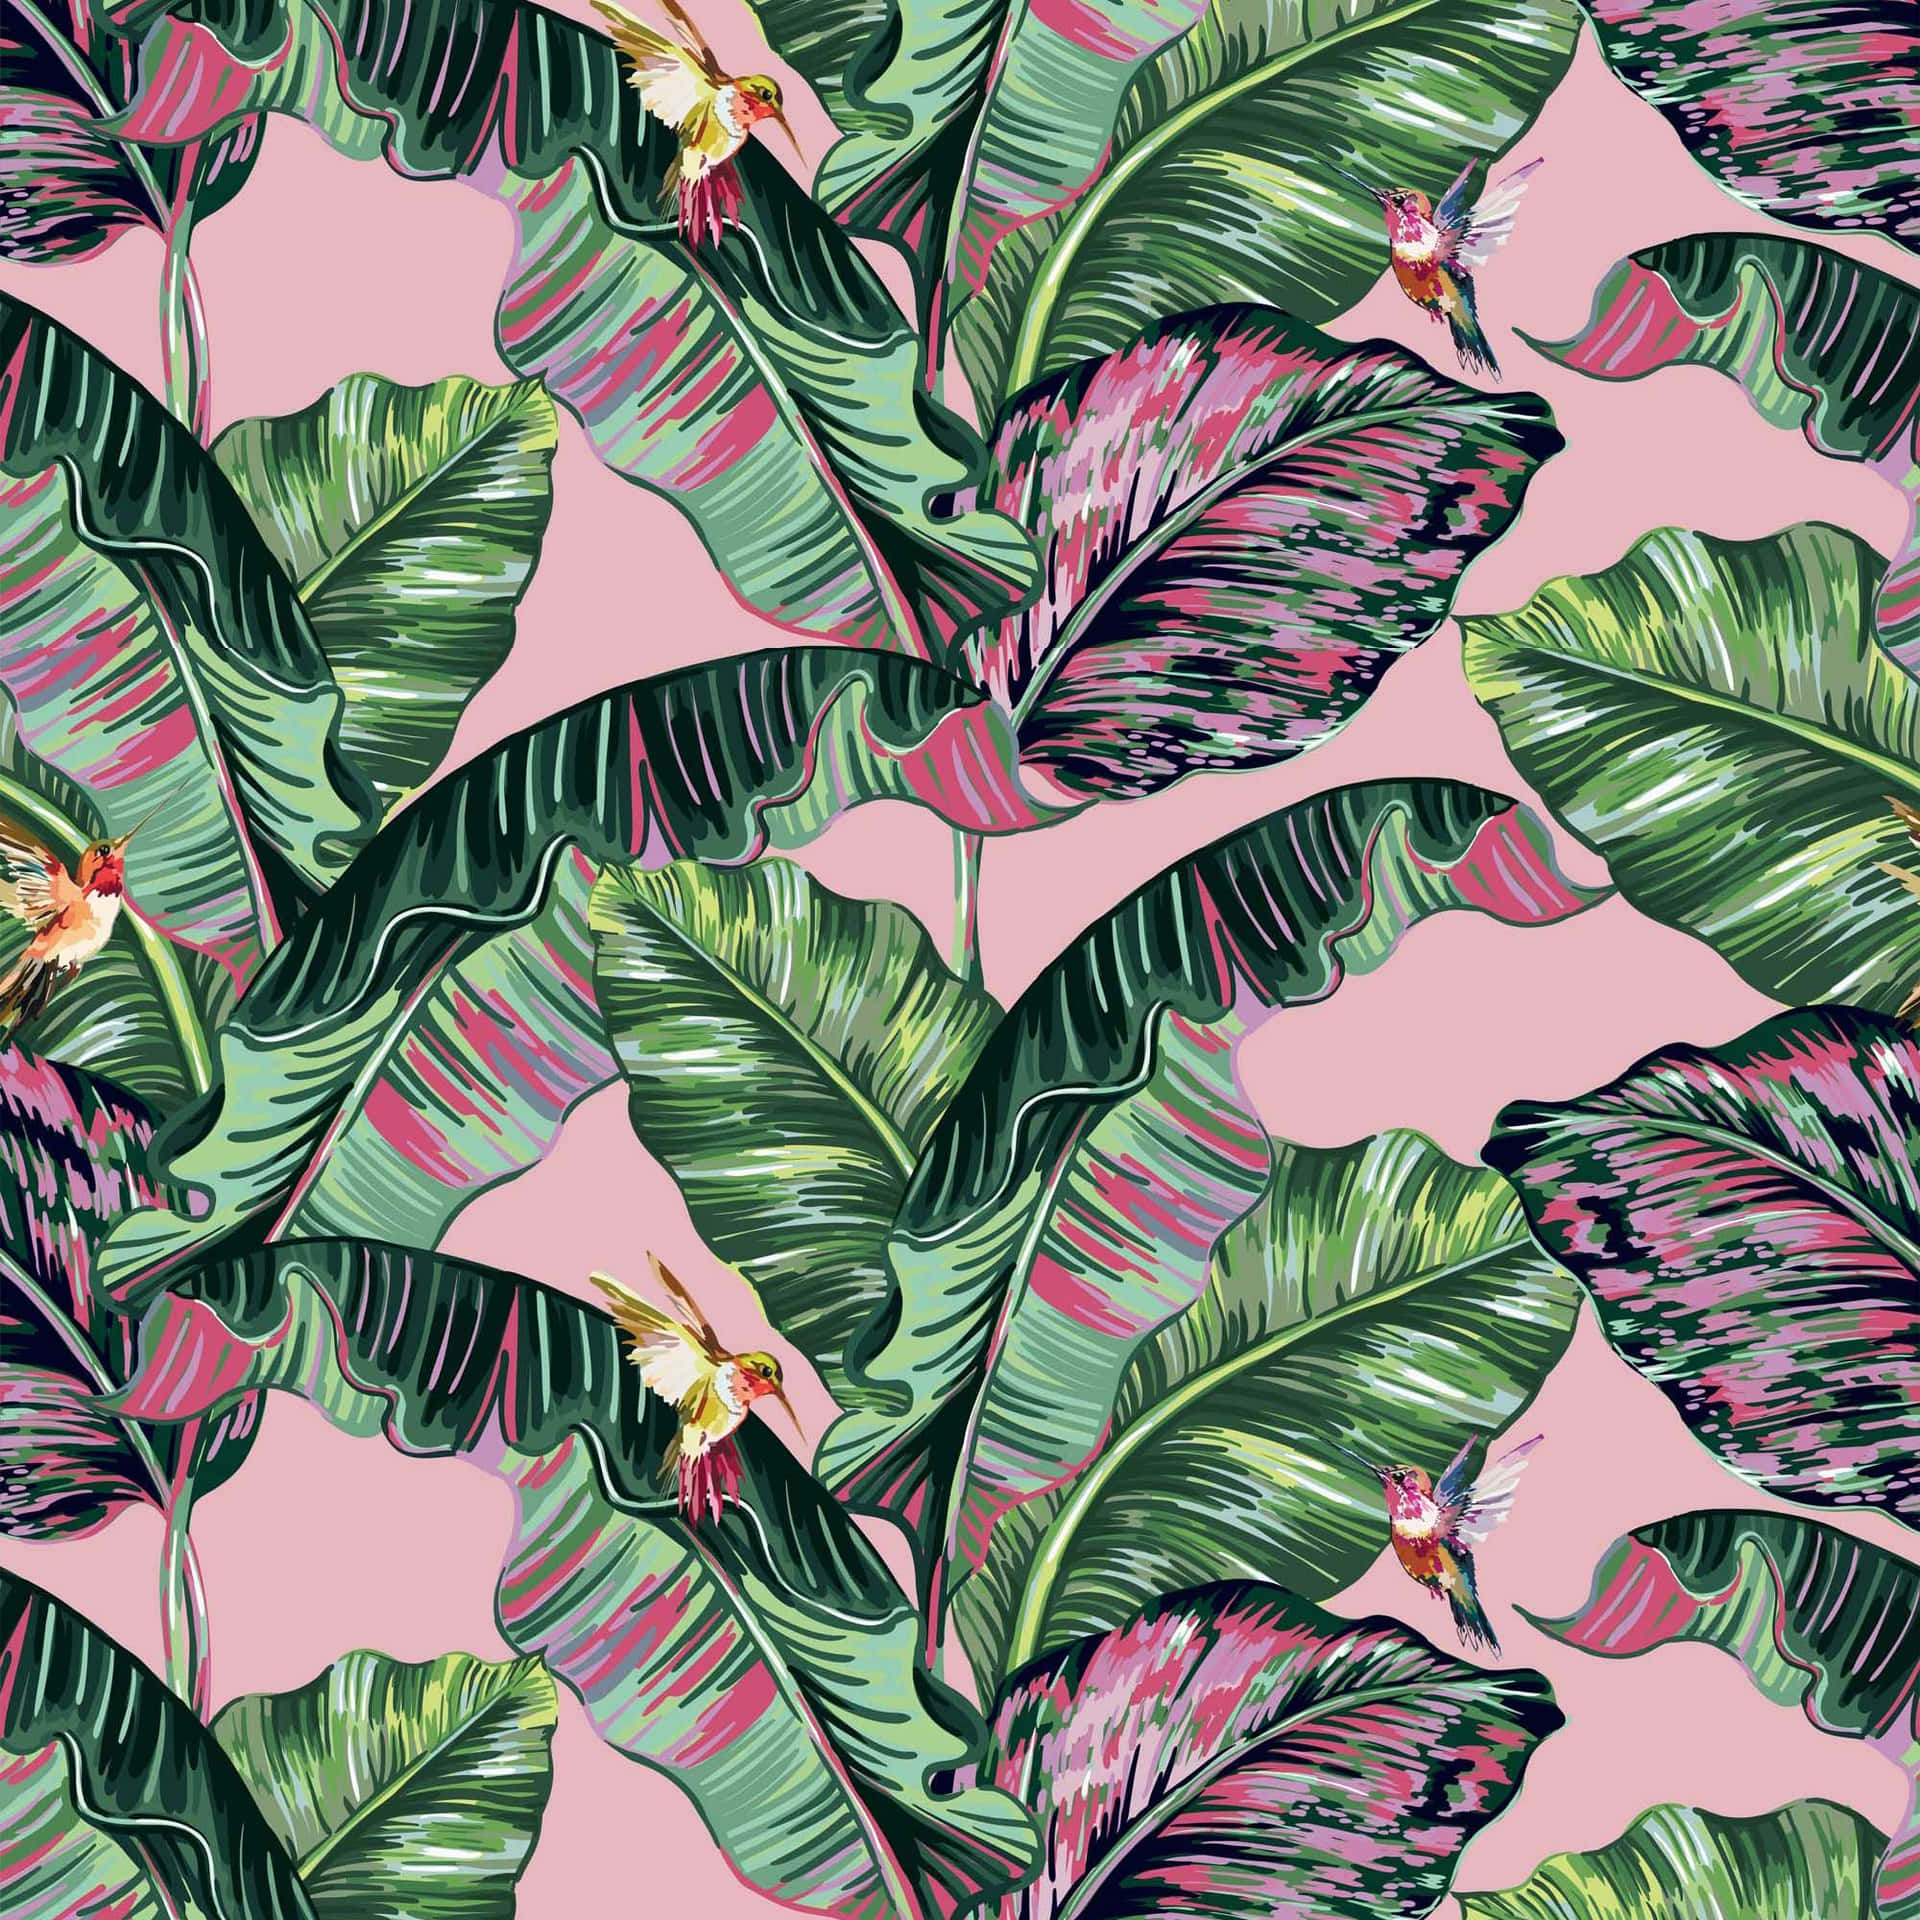 Vibrant Pink and Green Aesthetic Experience Wallpaper